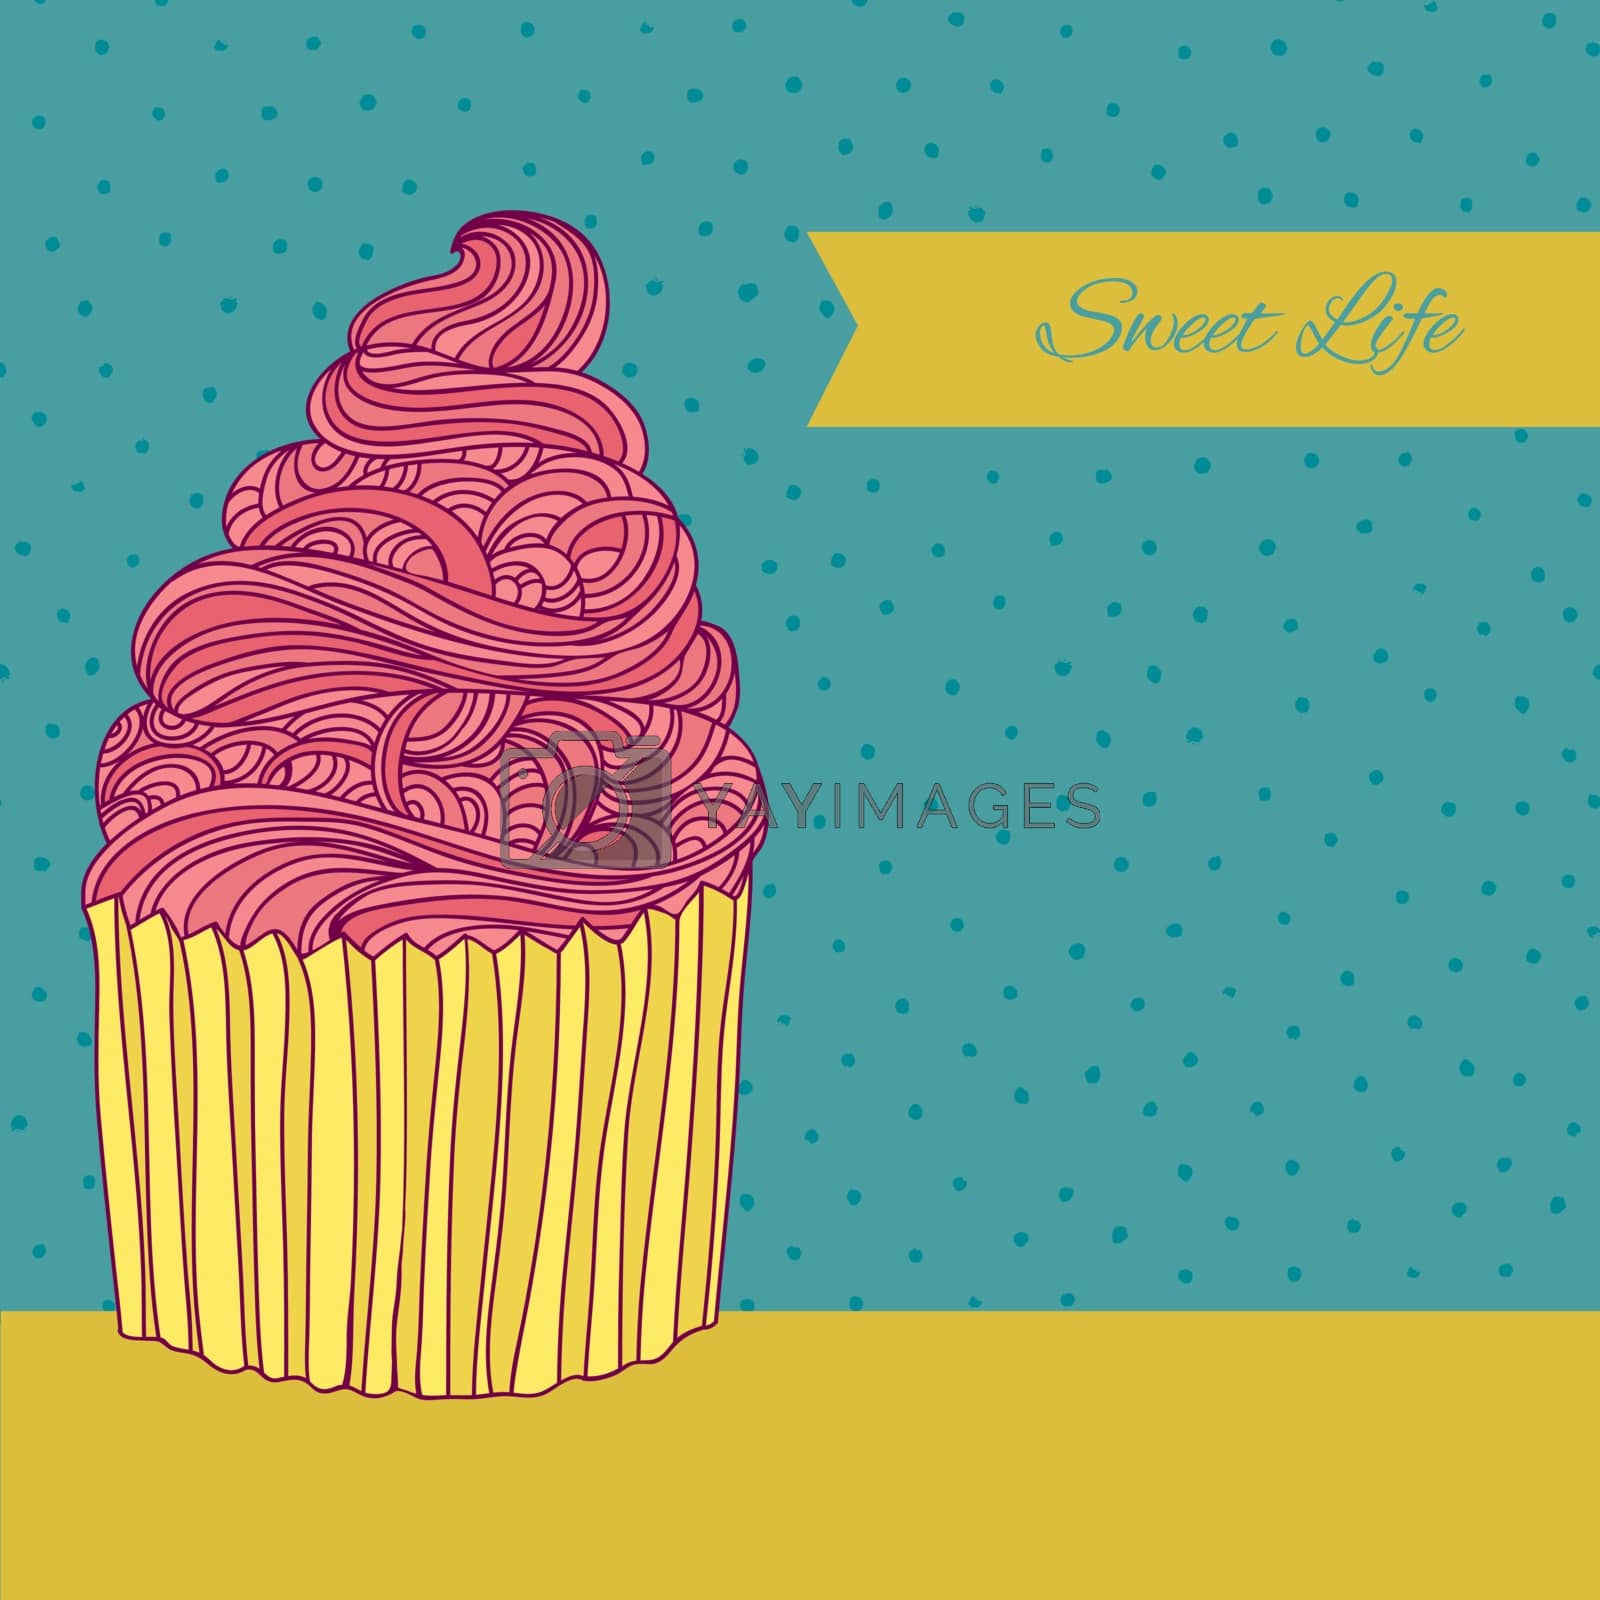 Royalty free image of Sweet card by Favete